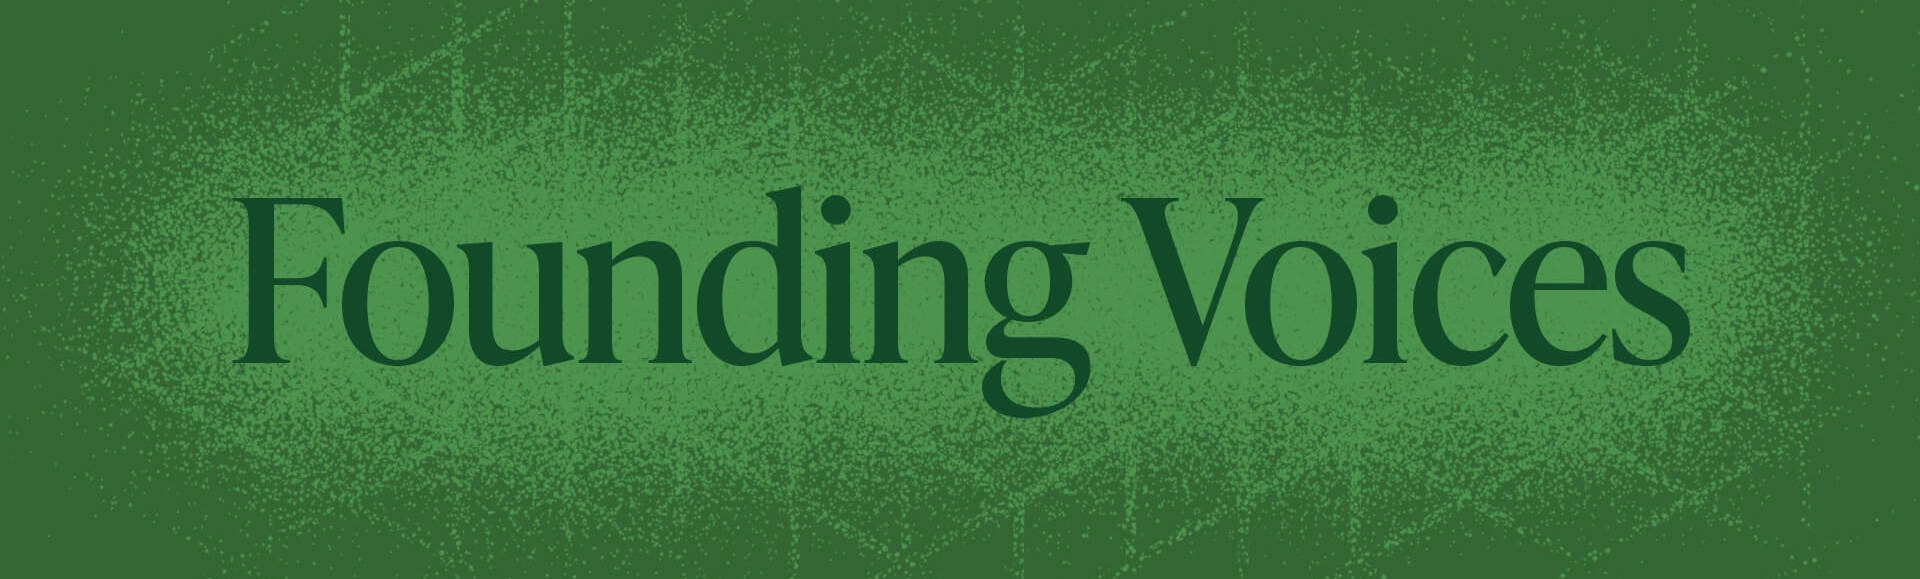 Founding Voices Banner Image